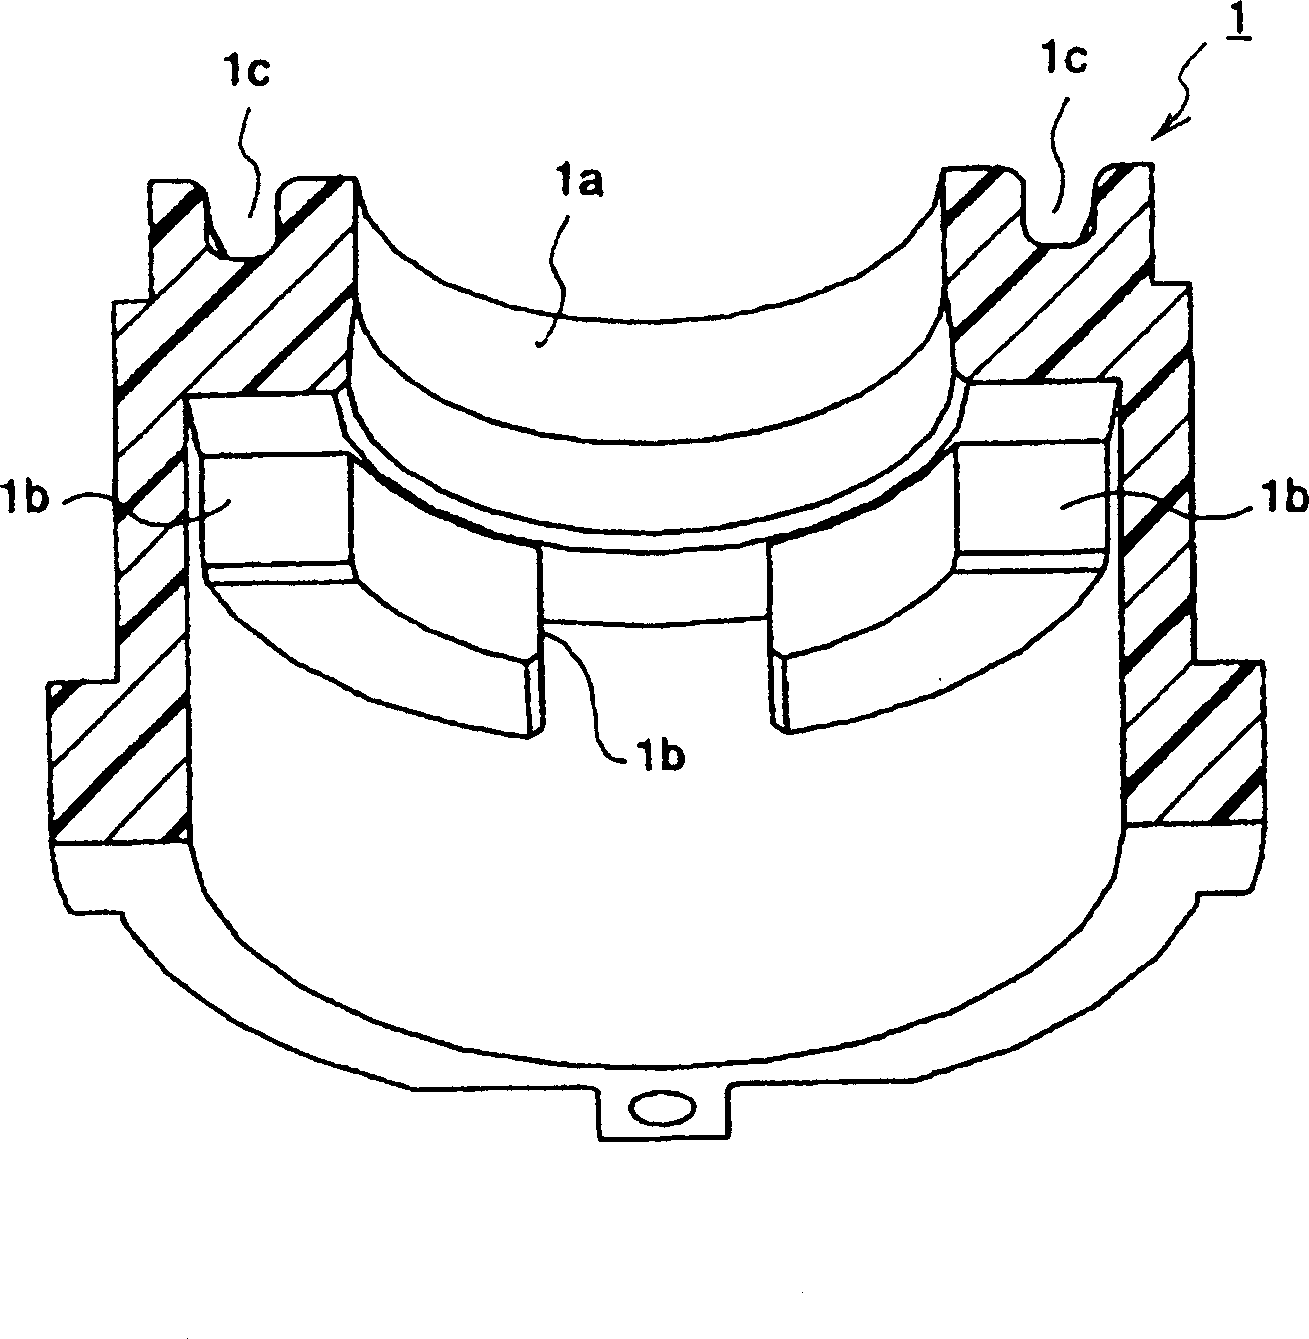 Multii-directional input device